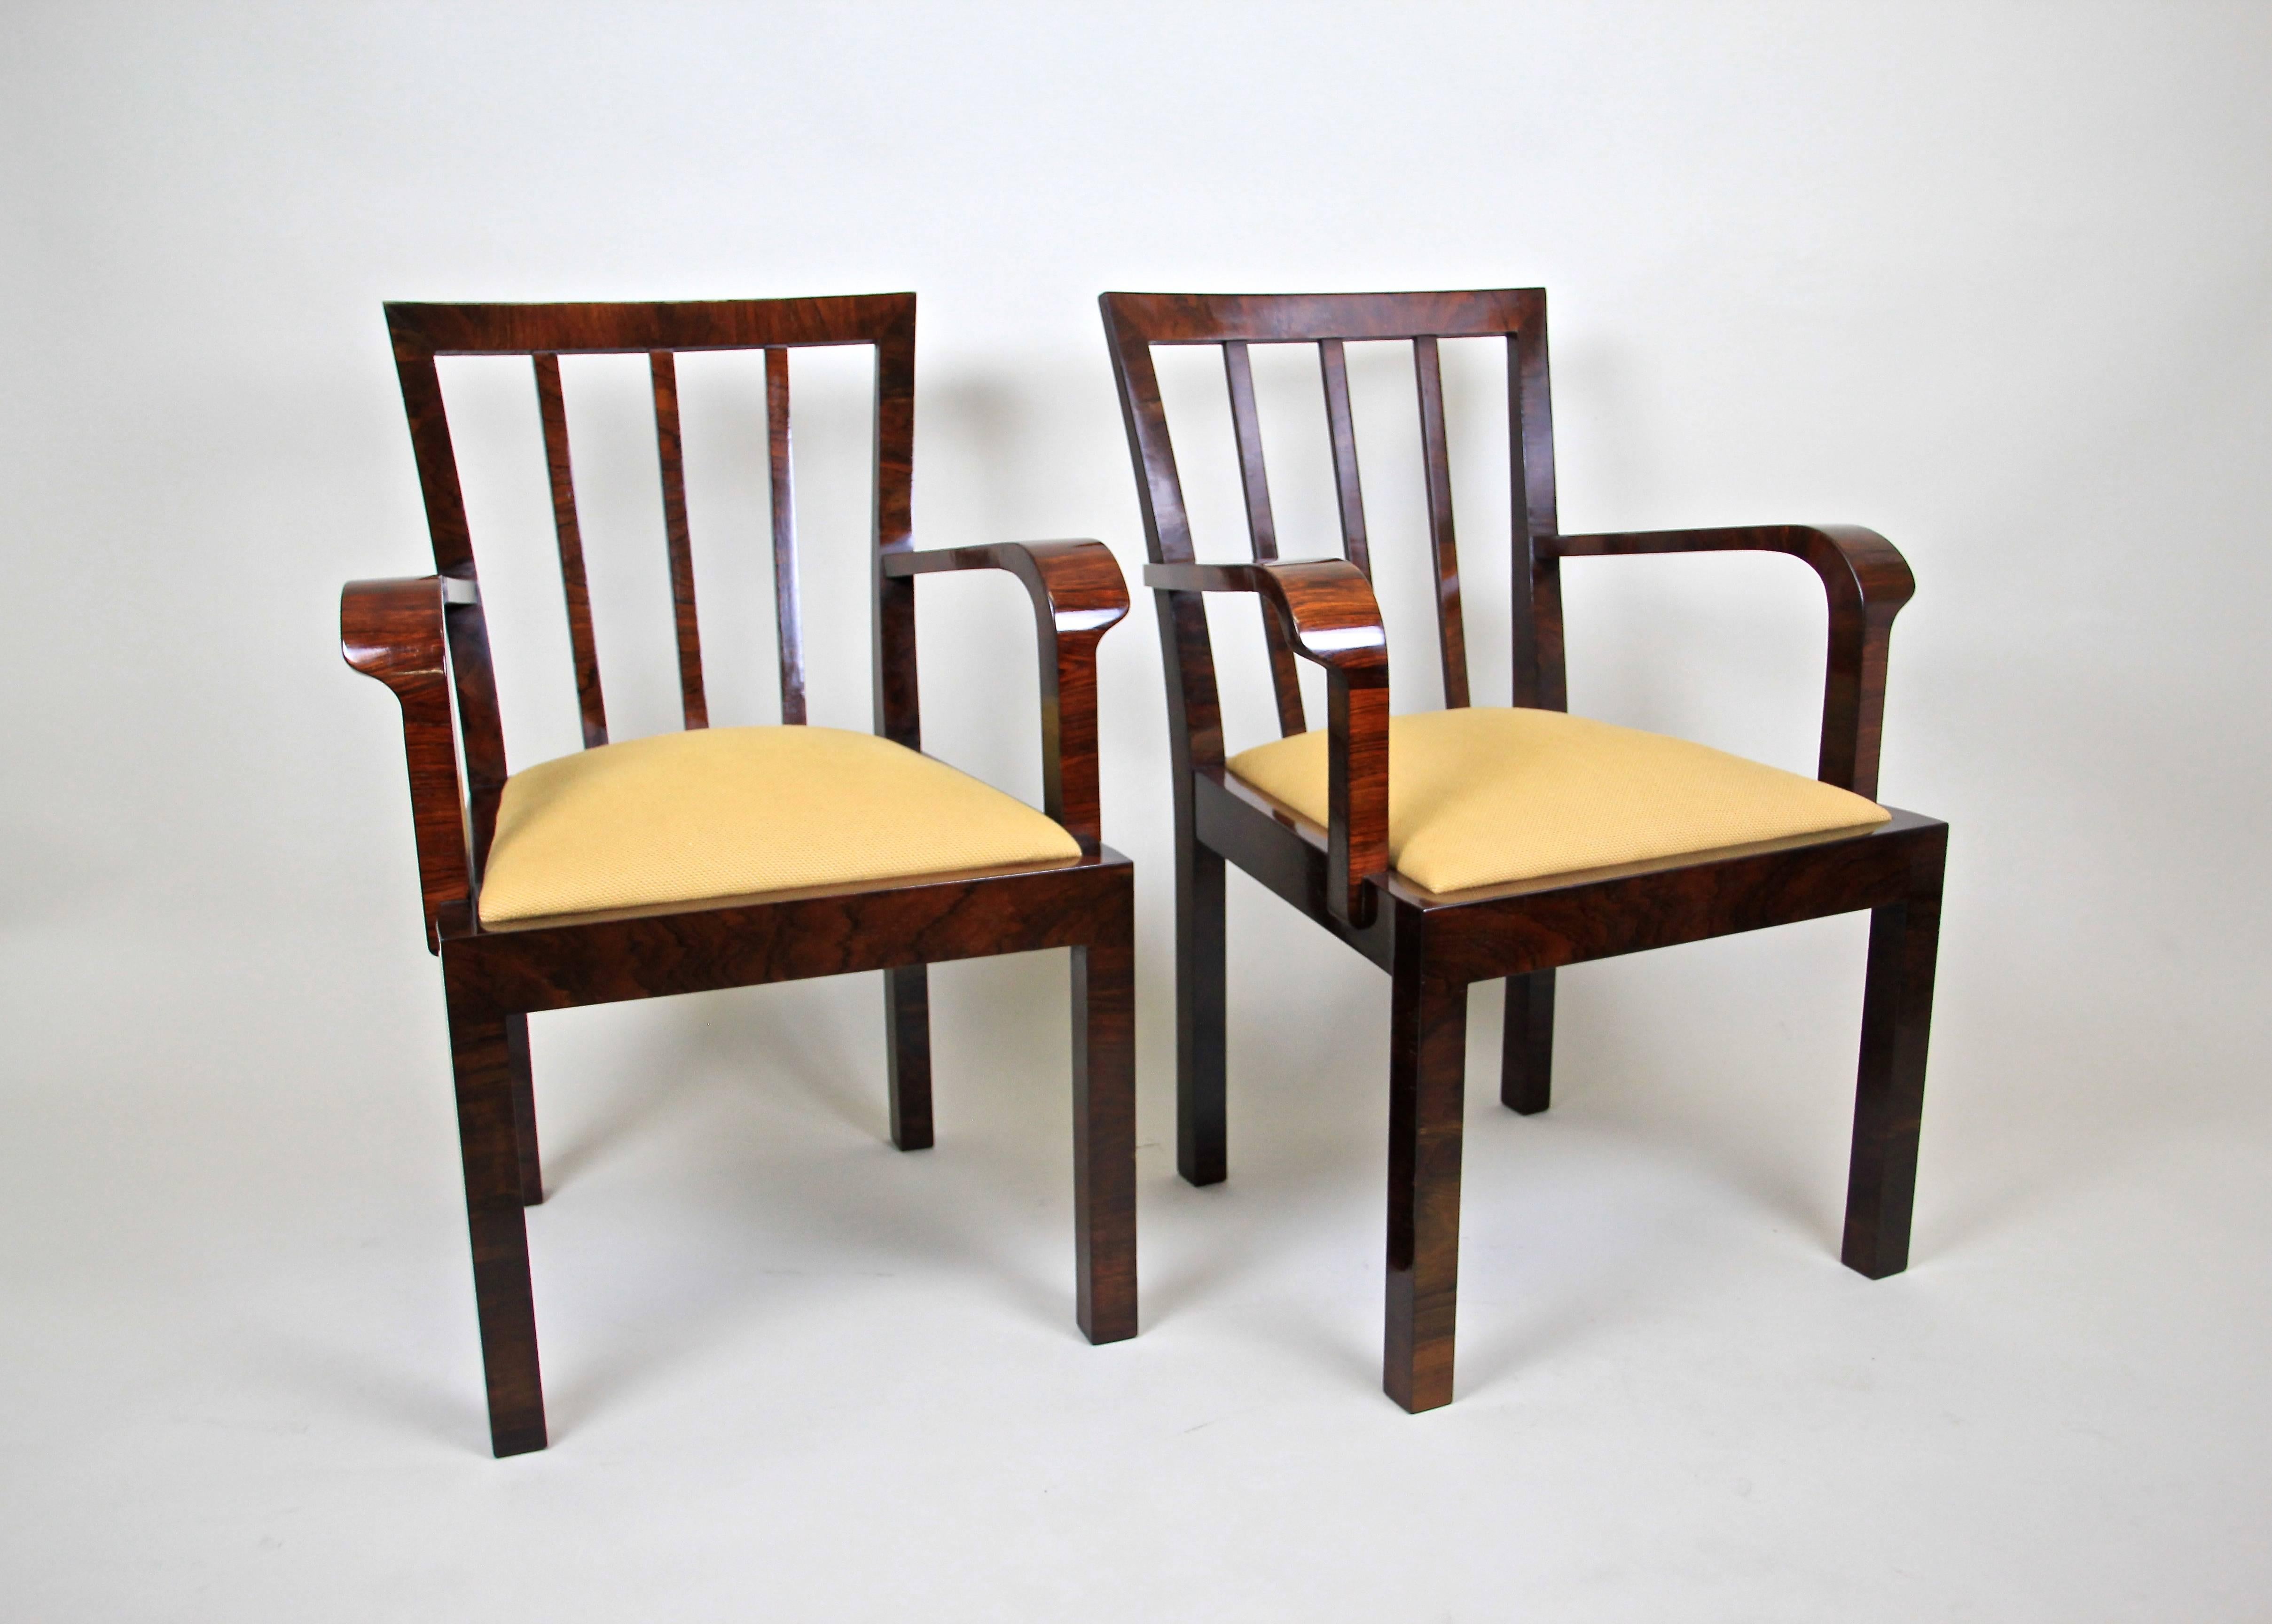 Fabric Pair of Art Deco Chairs Newly Upholstered, Austria, circa 1930